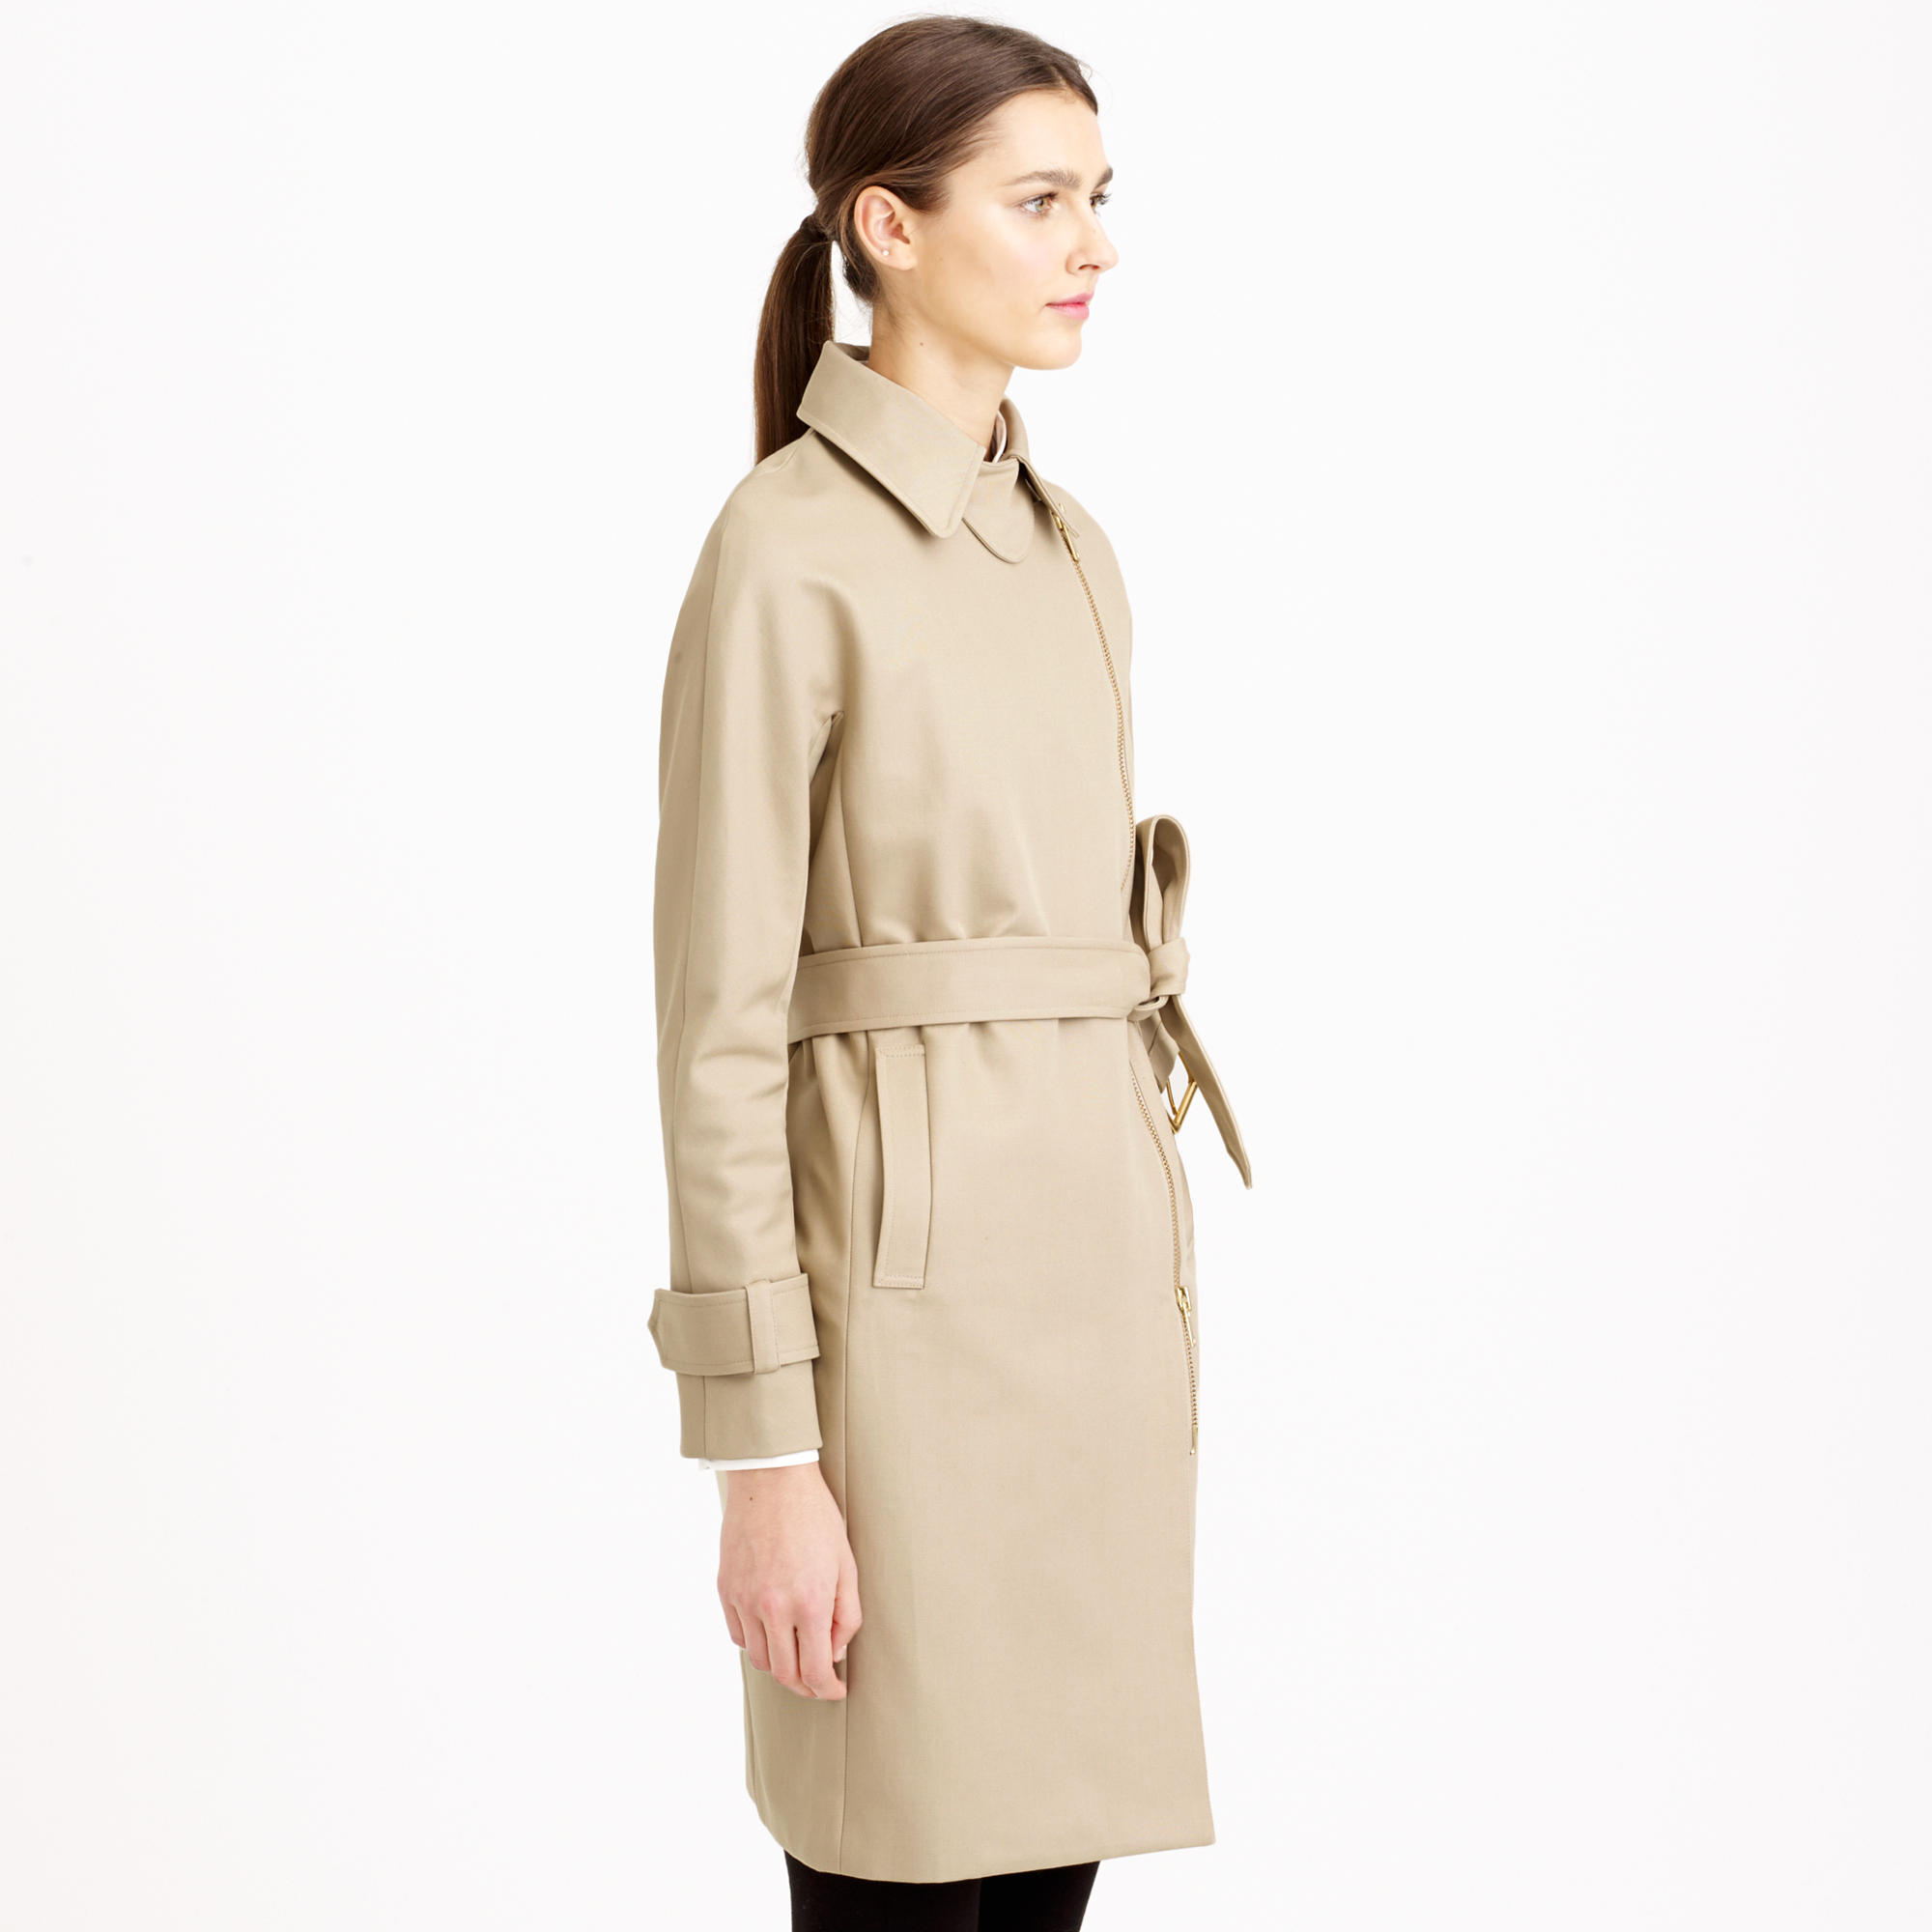 J.crew Collection Bonded Cotton Trench Coat in Natural | Lyst